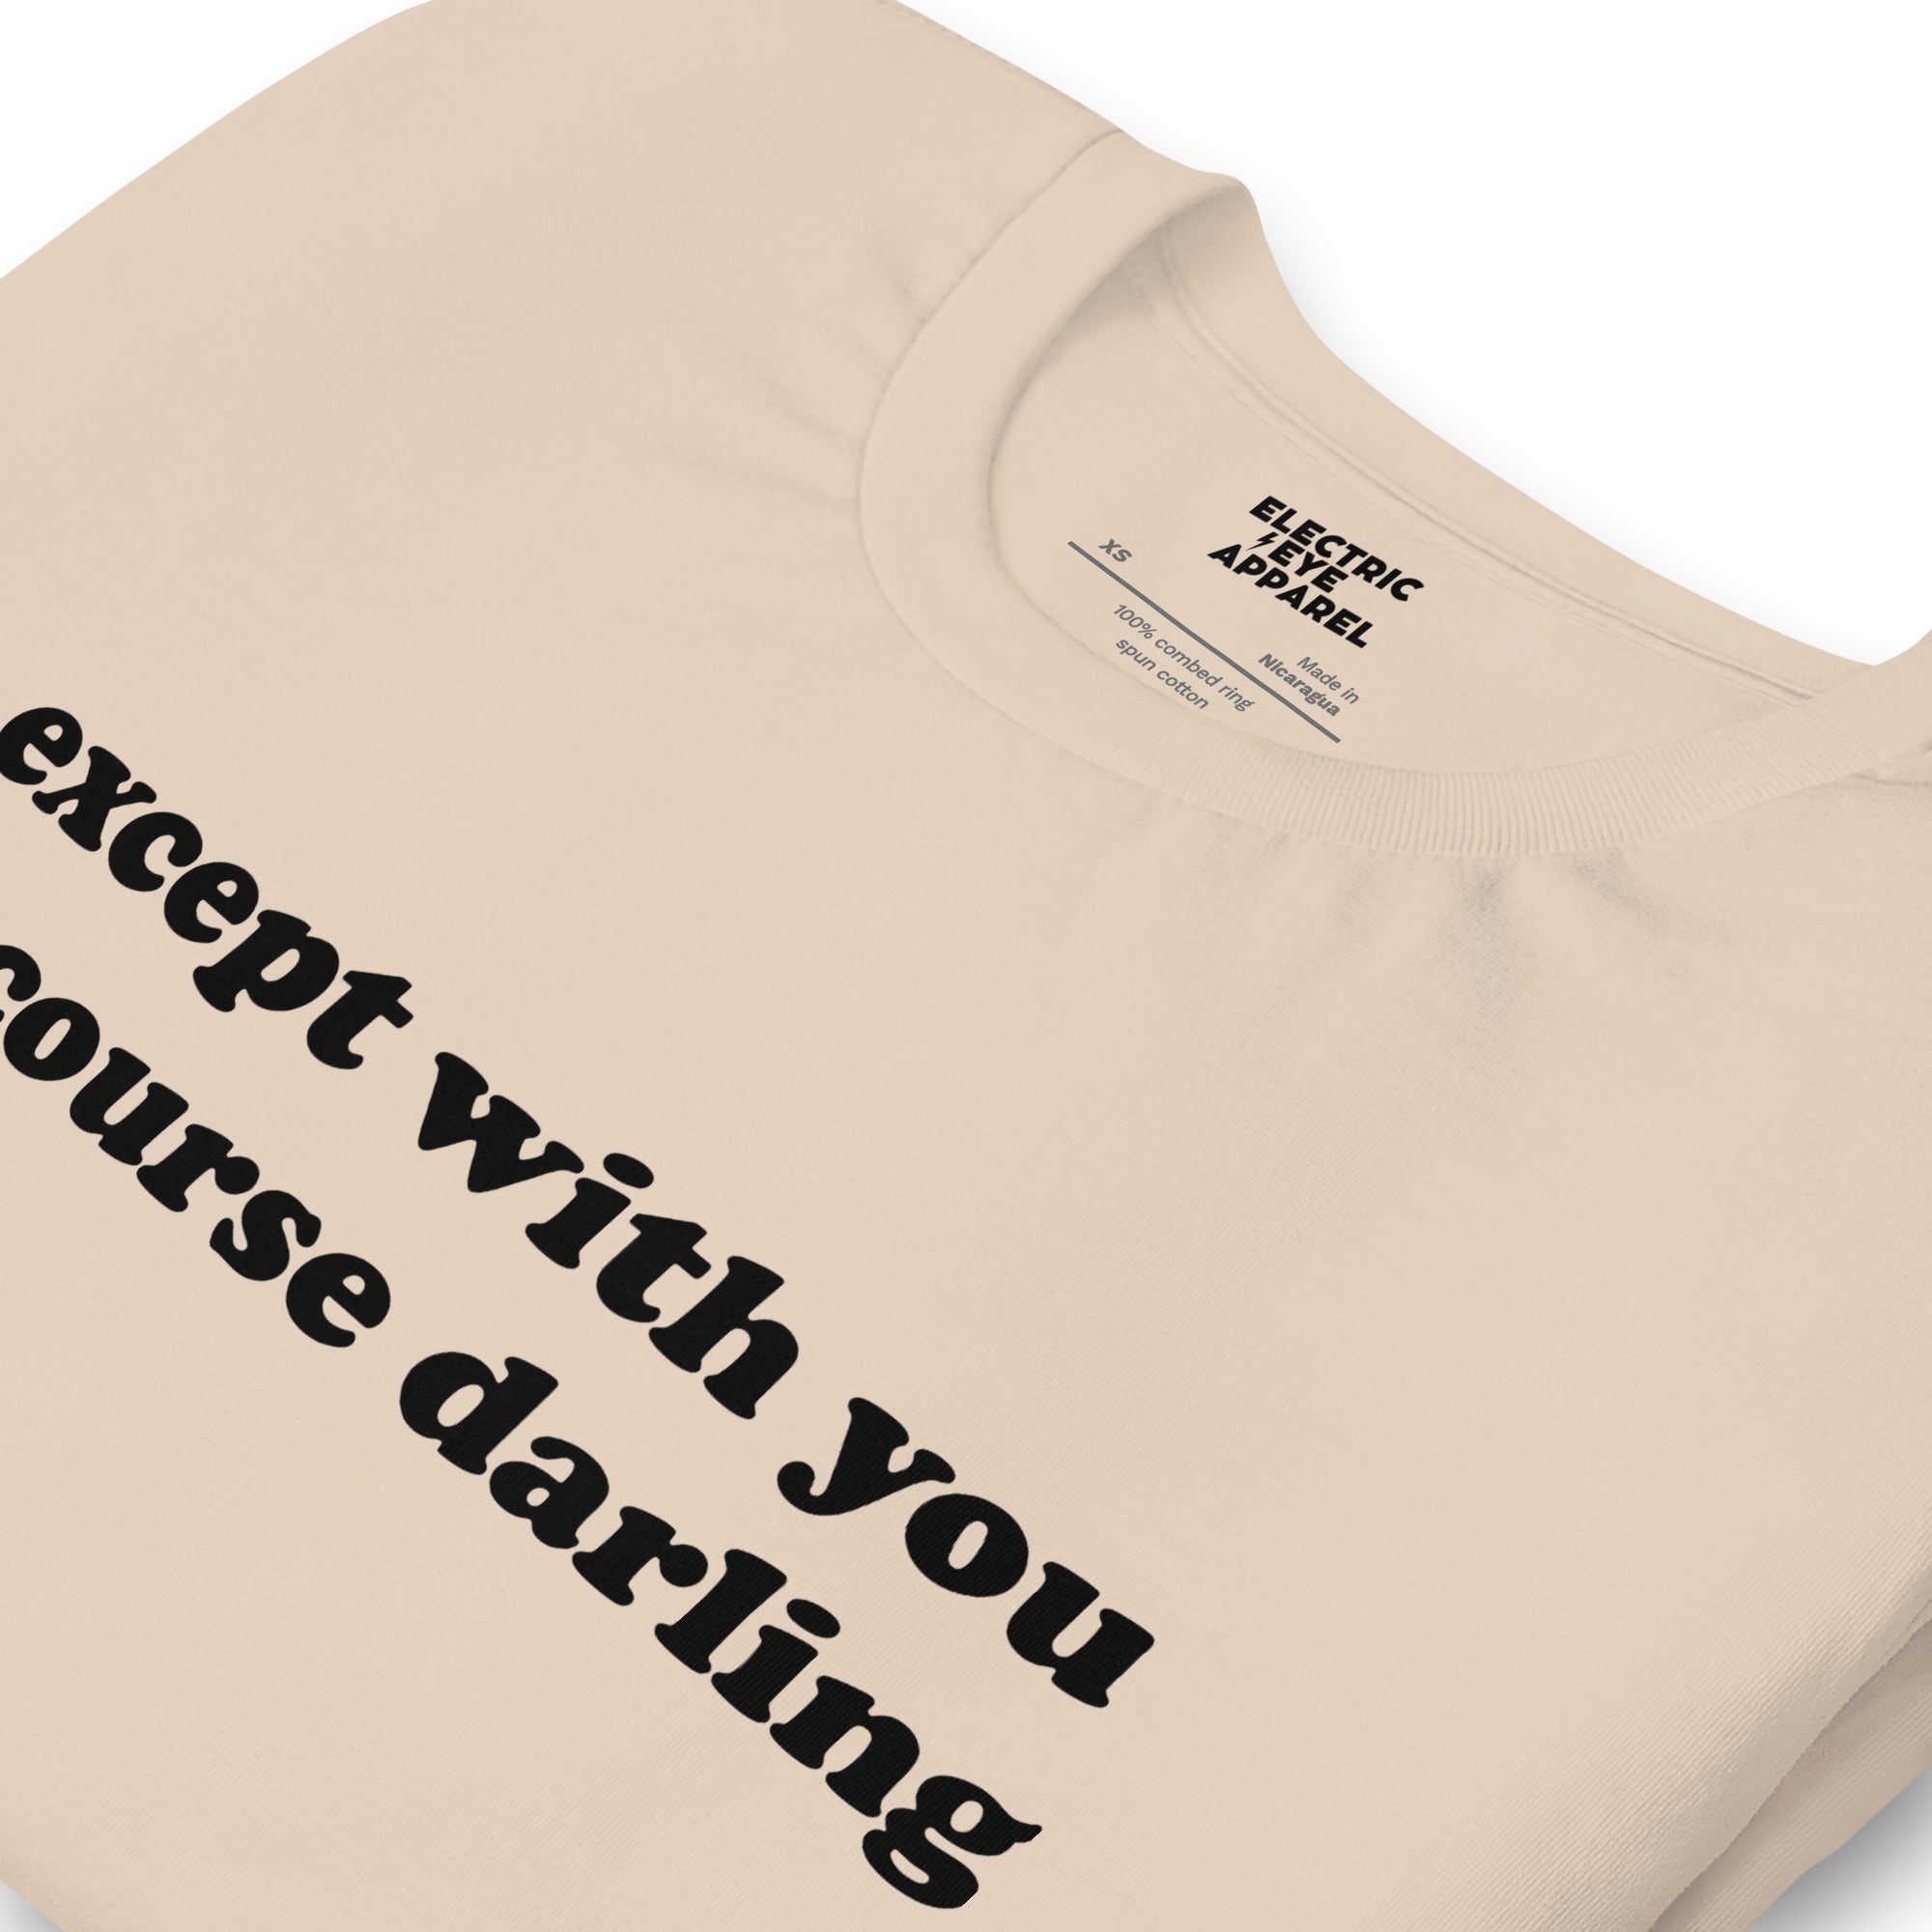 Except with you of course darling premium printed Unisex t-shirt - inspired by Noel Gallagher